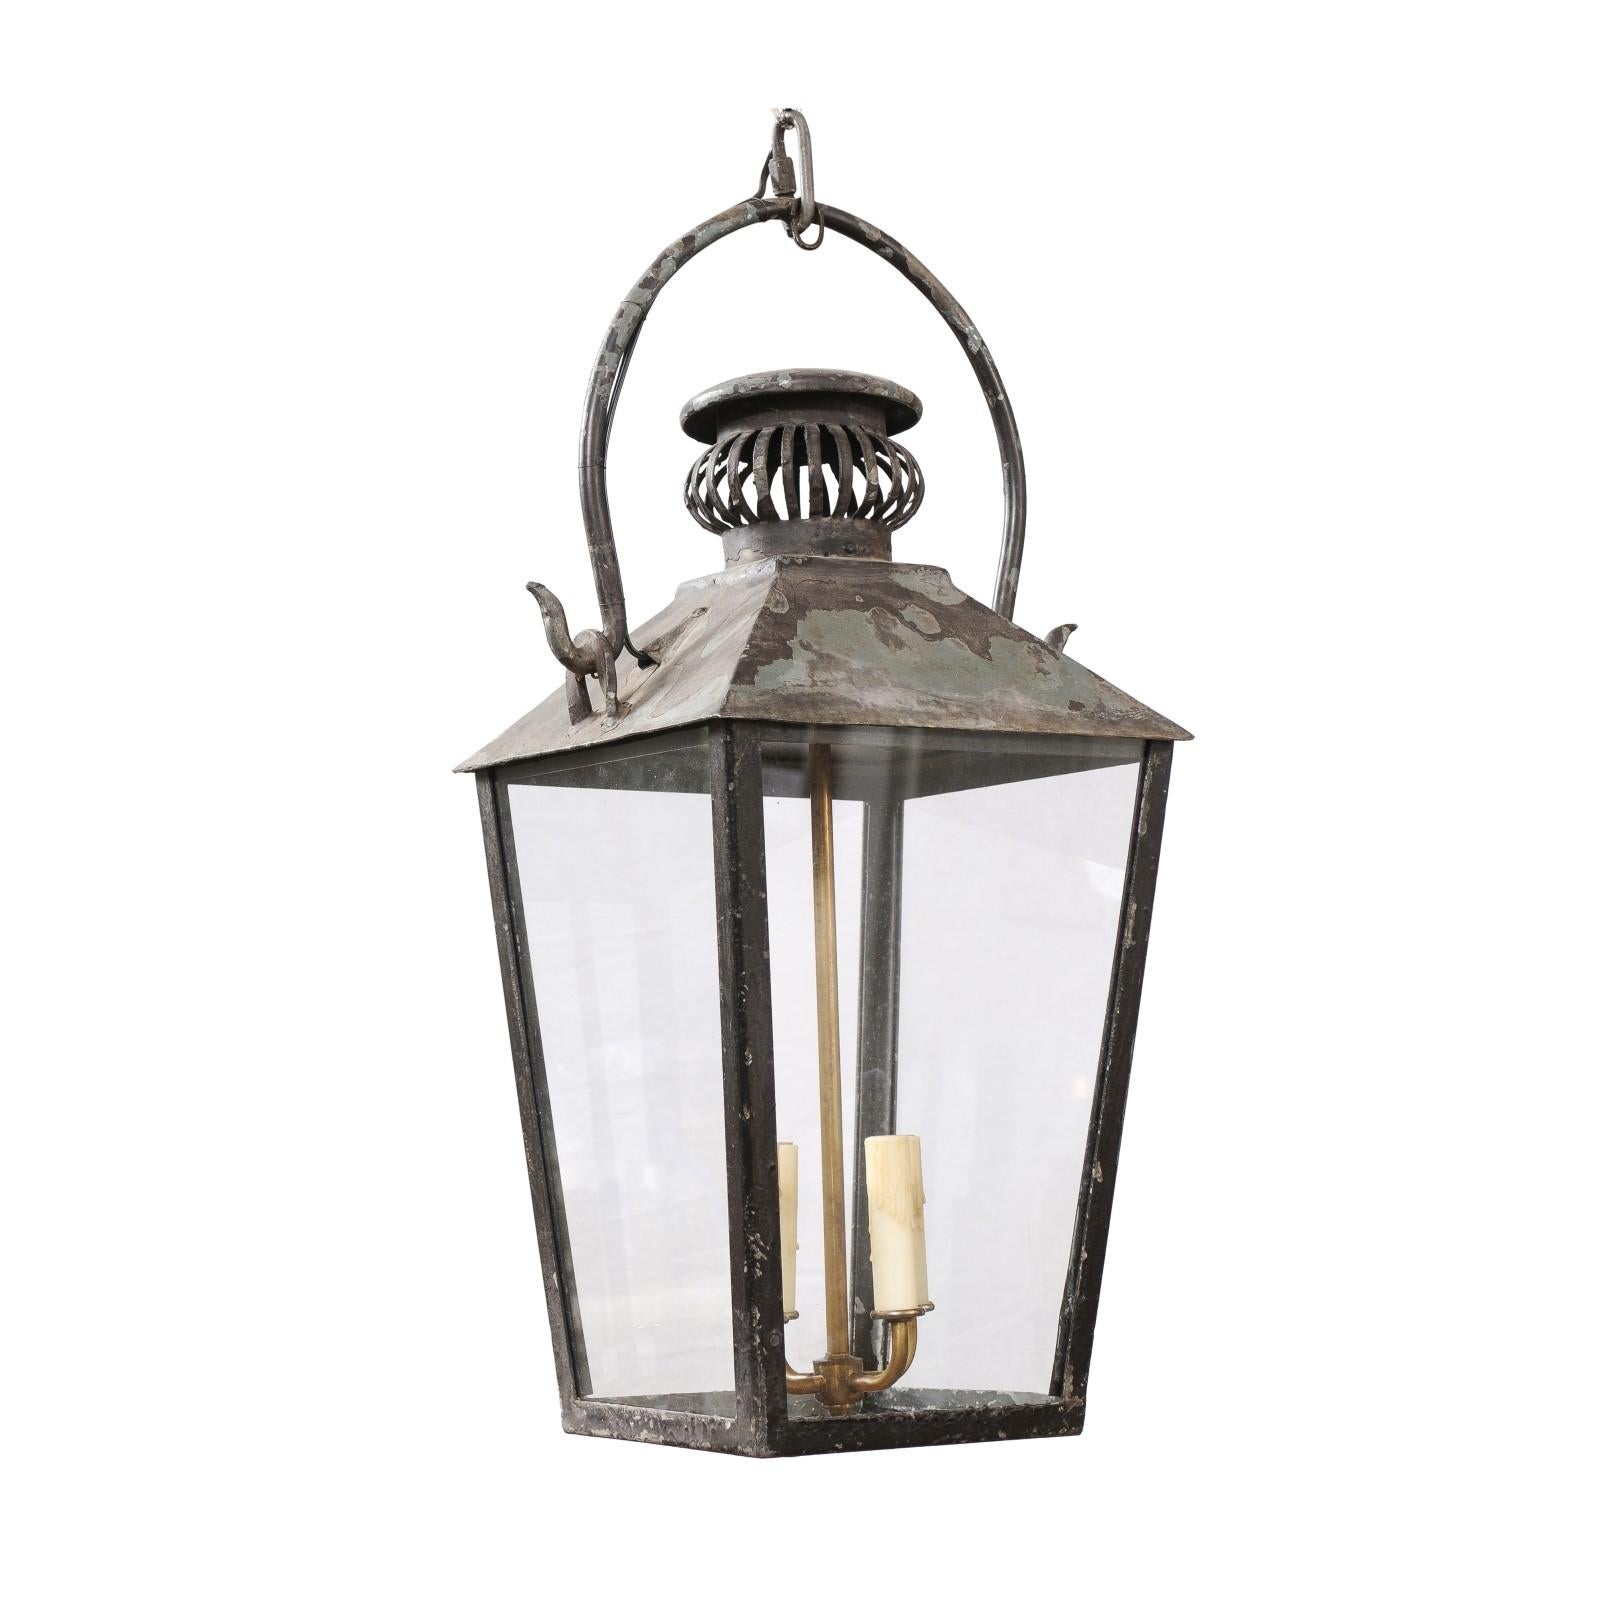 A French Turn of the Century iron lantern from circa 1900 with four lights, glass panels and pierced canopy. This French Turn of the Century iron lantern, dating back to circa 1900, is a testament to the timeless elegance and craftsmanship of early